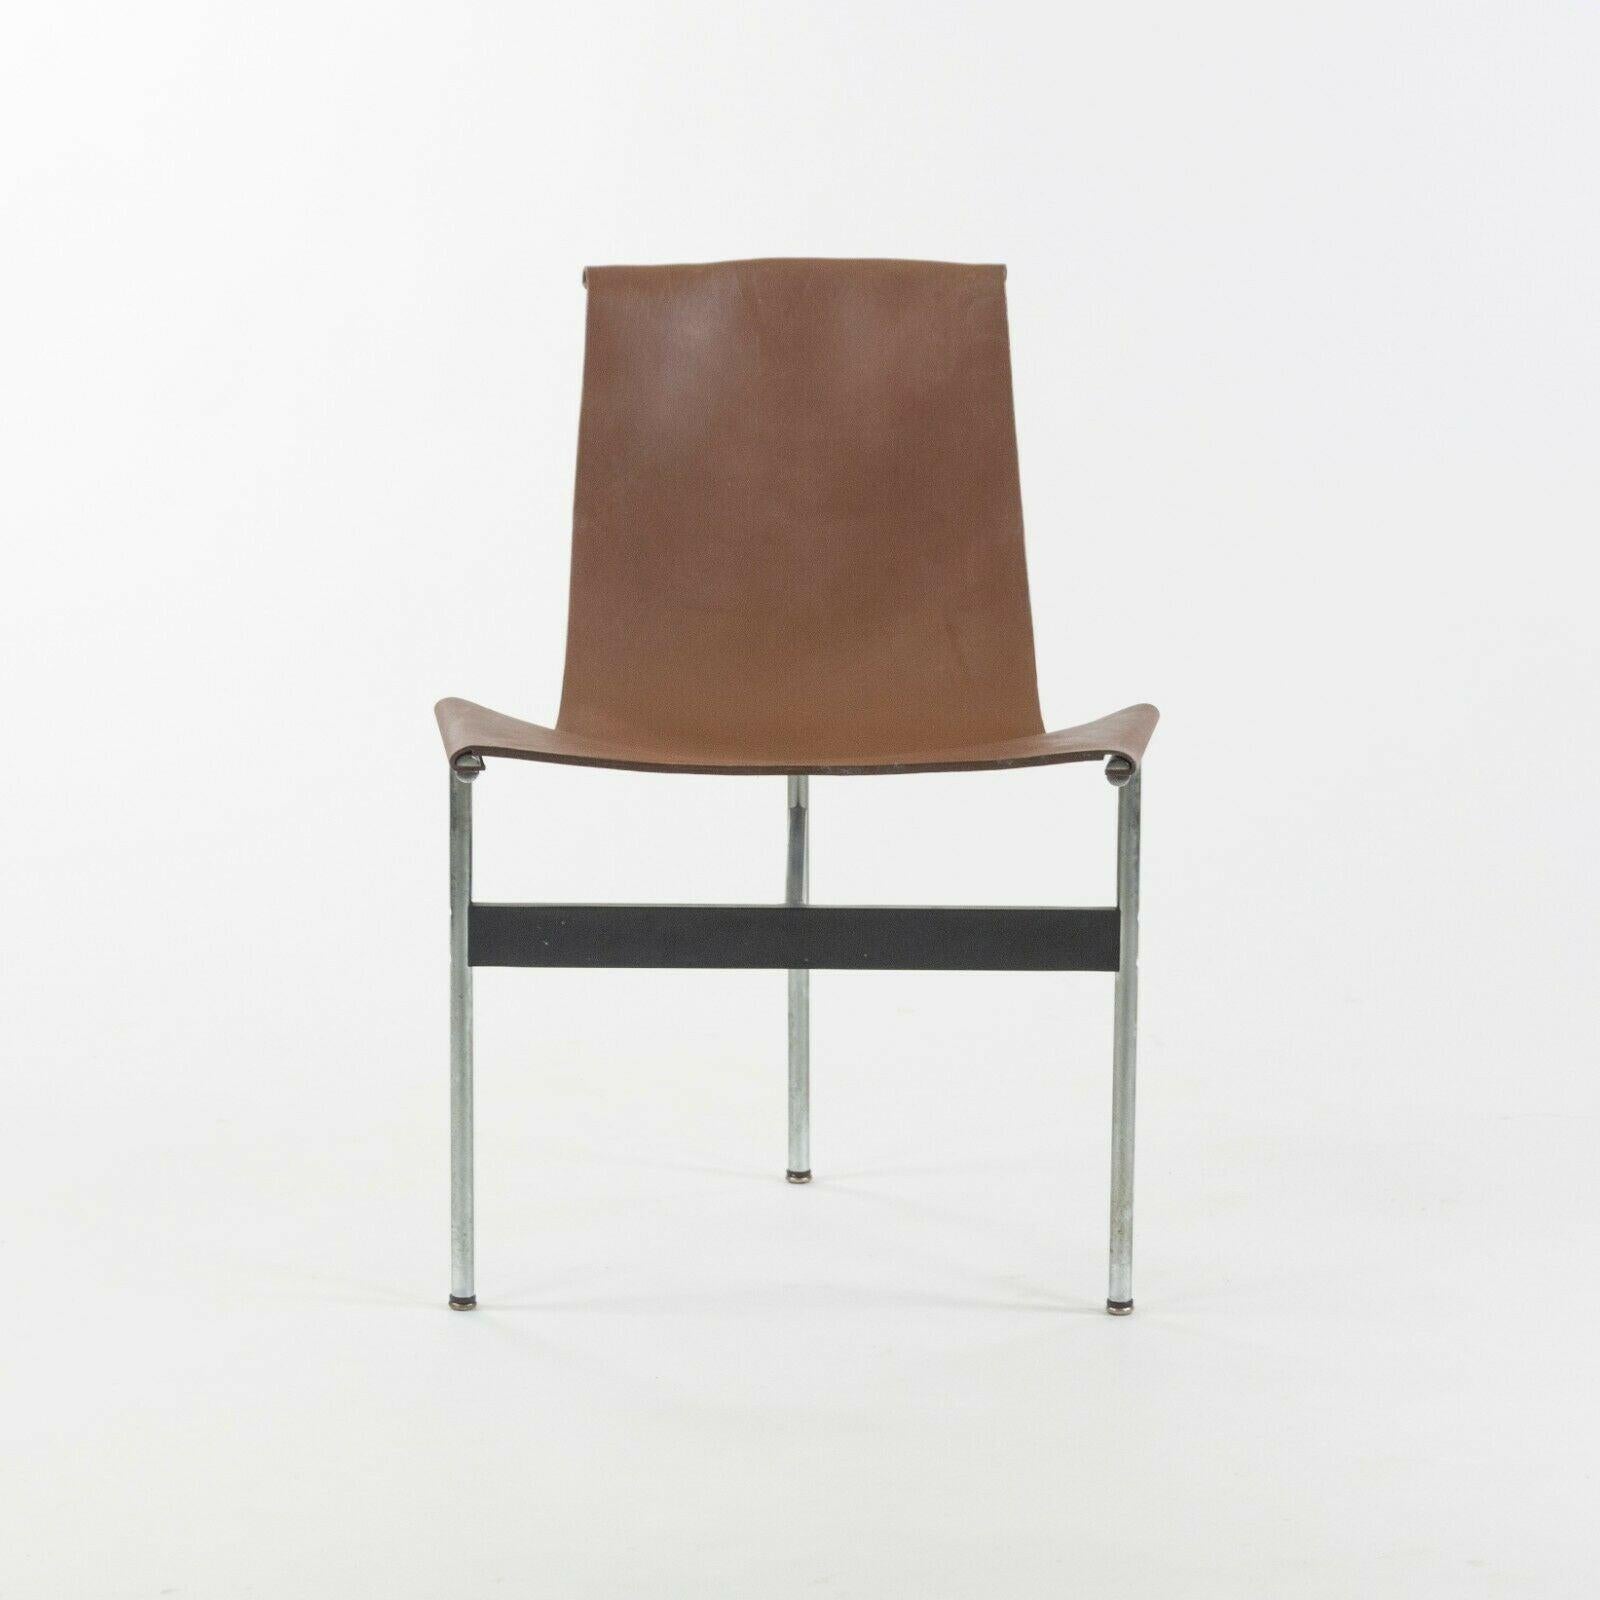 Listed for sale is a vintage set of four T dining chairs by Katavolos, Littel, and Kelley for Laverne International in Brown Leather. These gorgeous examples have a vegetable-tanned leather hide, which is a warm and lovely brown. The chairs appear